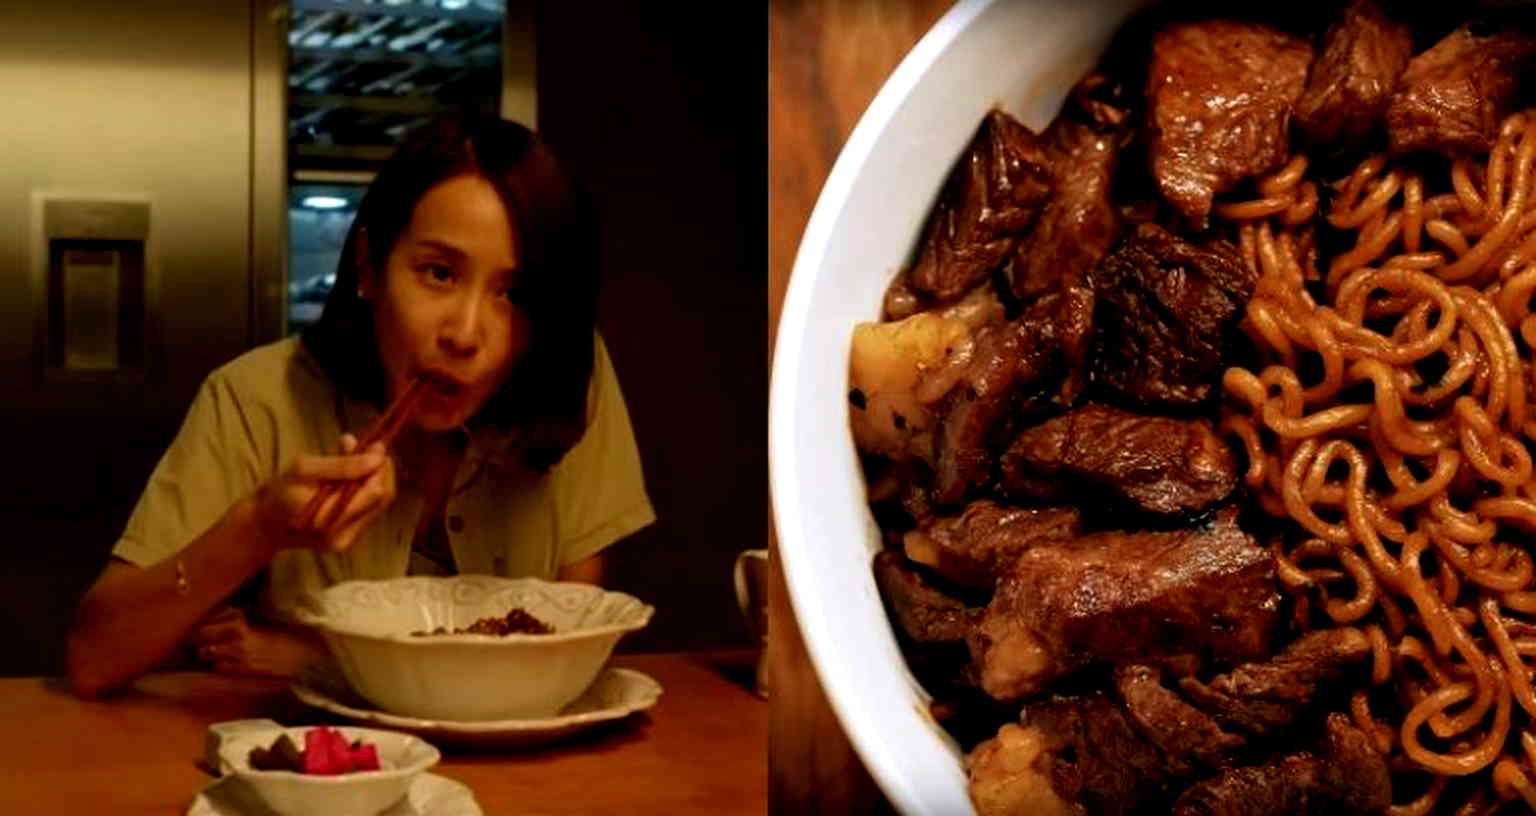 How to Cook the ‘Jjapaguri’ Dish From ‘Parasite’